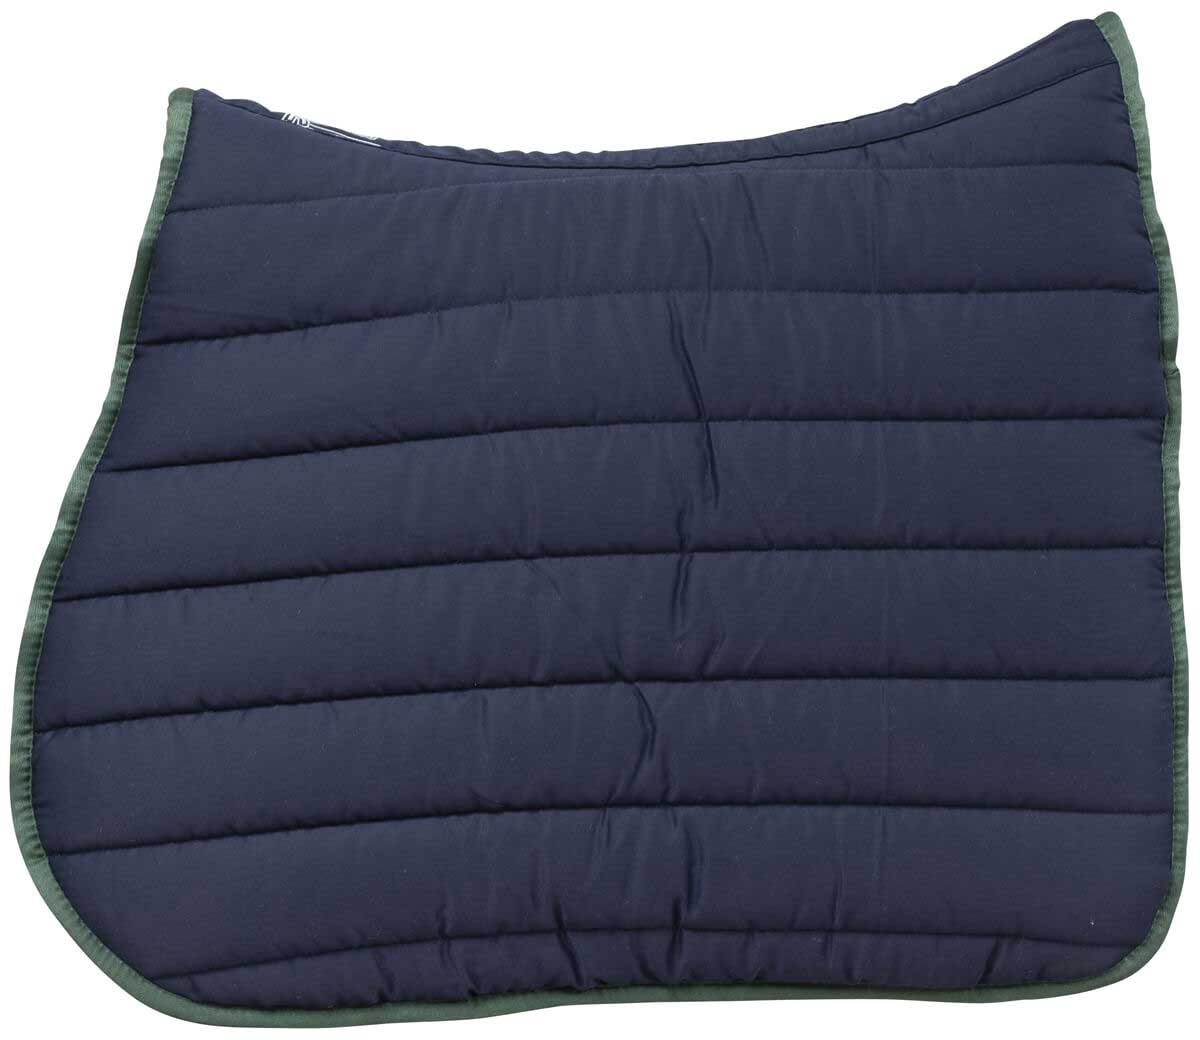 Shires Wessex High Wither Comfort Saddlecloth Navy Blue 